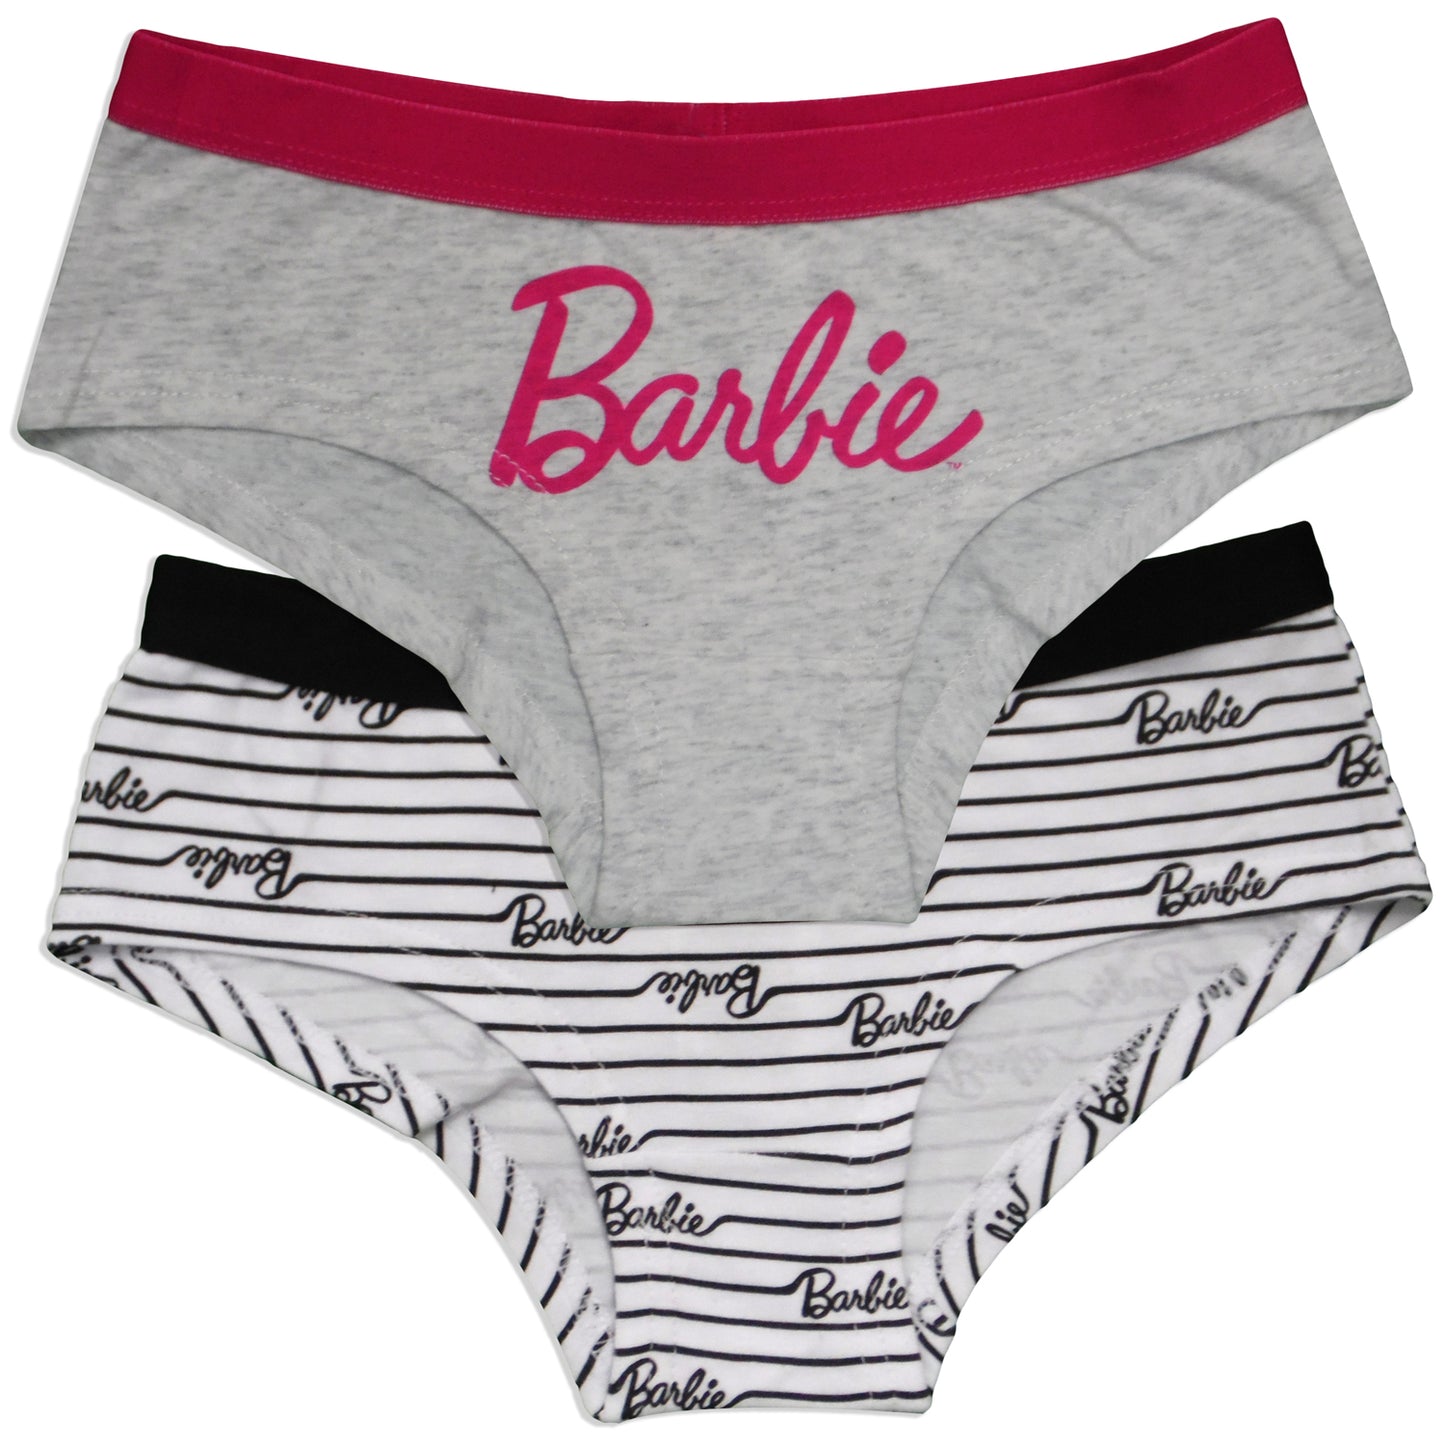 Barbie Cotton Underwear Knickers Pack of 2 for Girls – Shoppe 'N' Smile